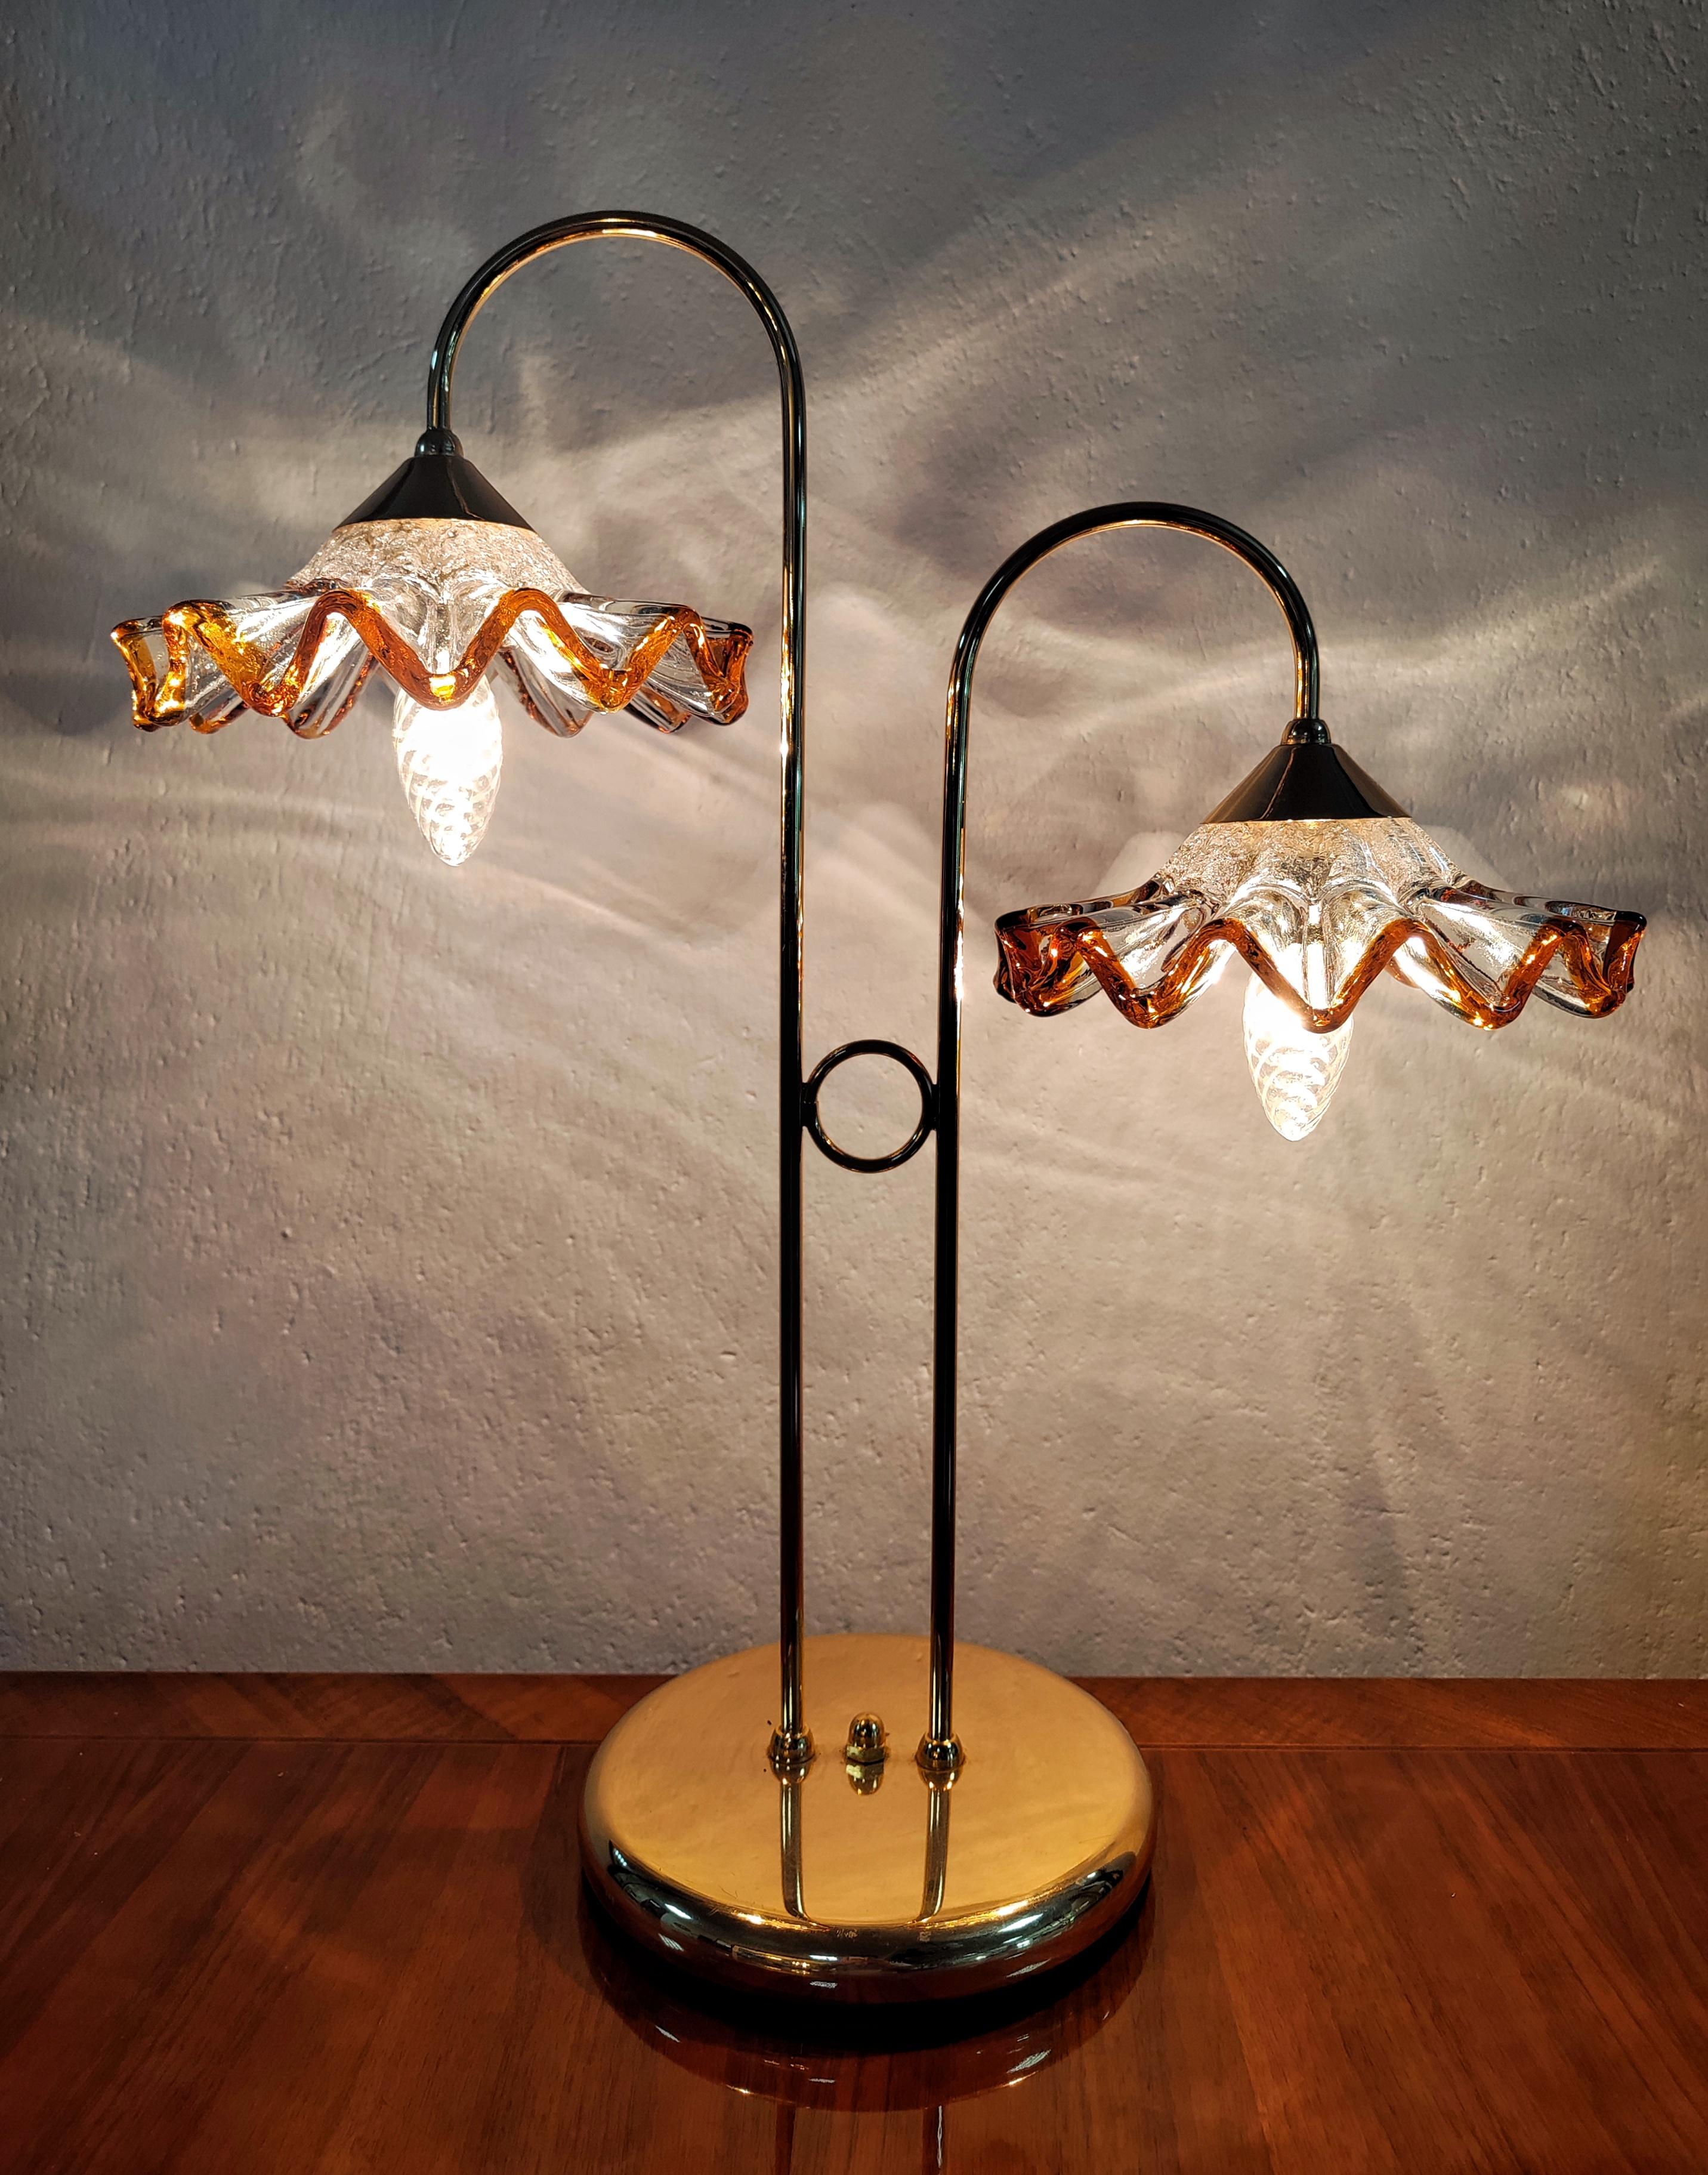 Rare and Attractive Mid Century Modern Dual Table Lamp done in brass, with clear and amber Murano glass floral shades by AV Mazzega. Made in Italy in 1970s.

Nearly excellent vintage condition with barely any signs of use and time. Glass shades are